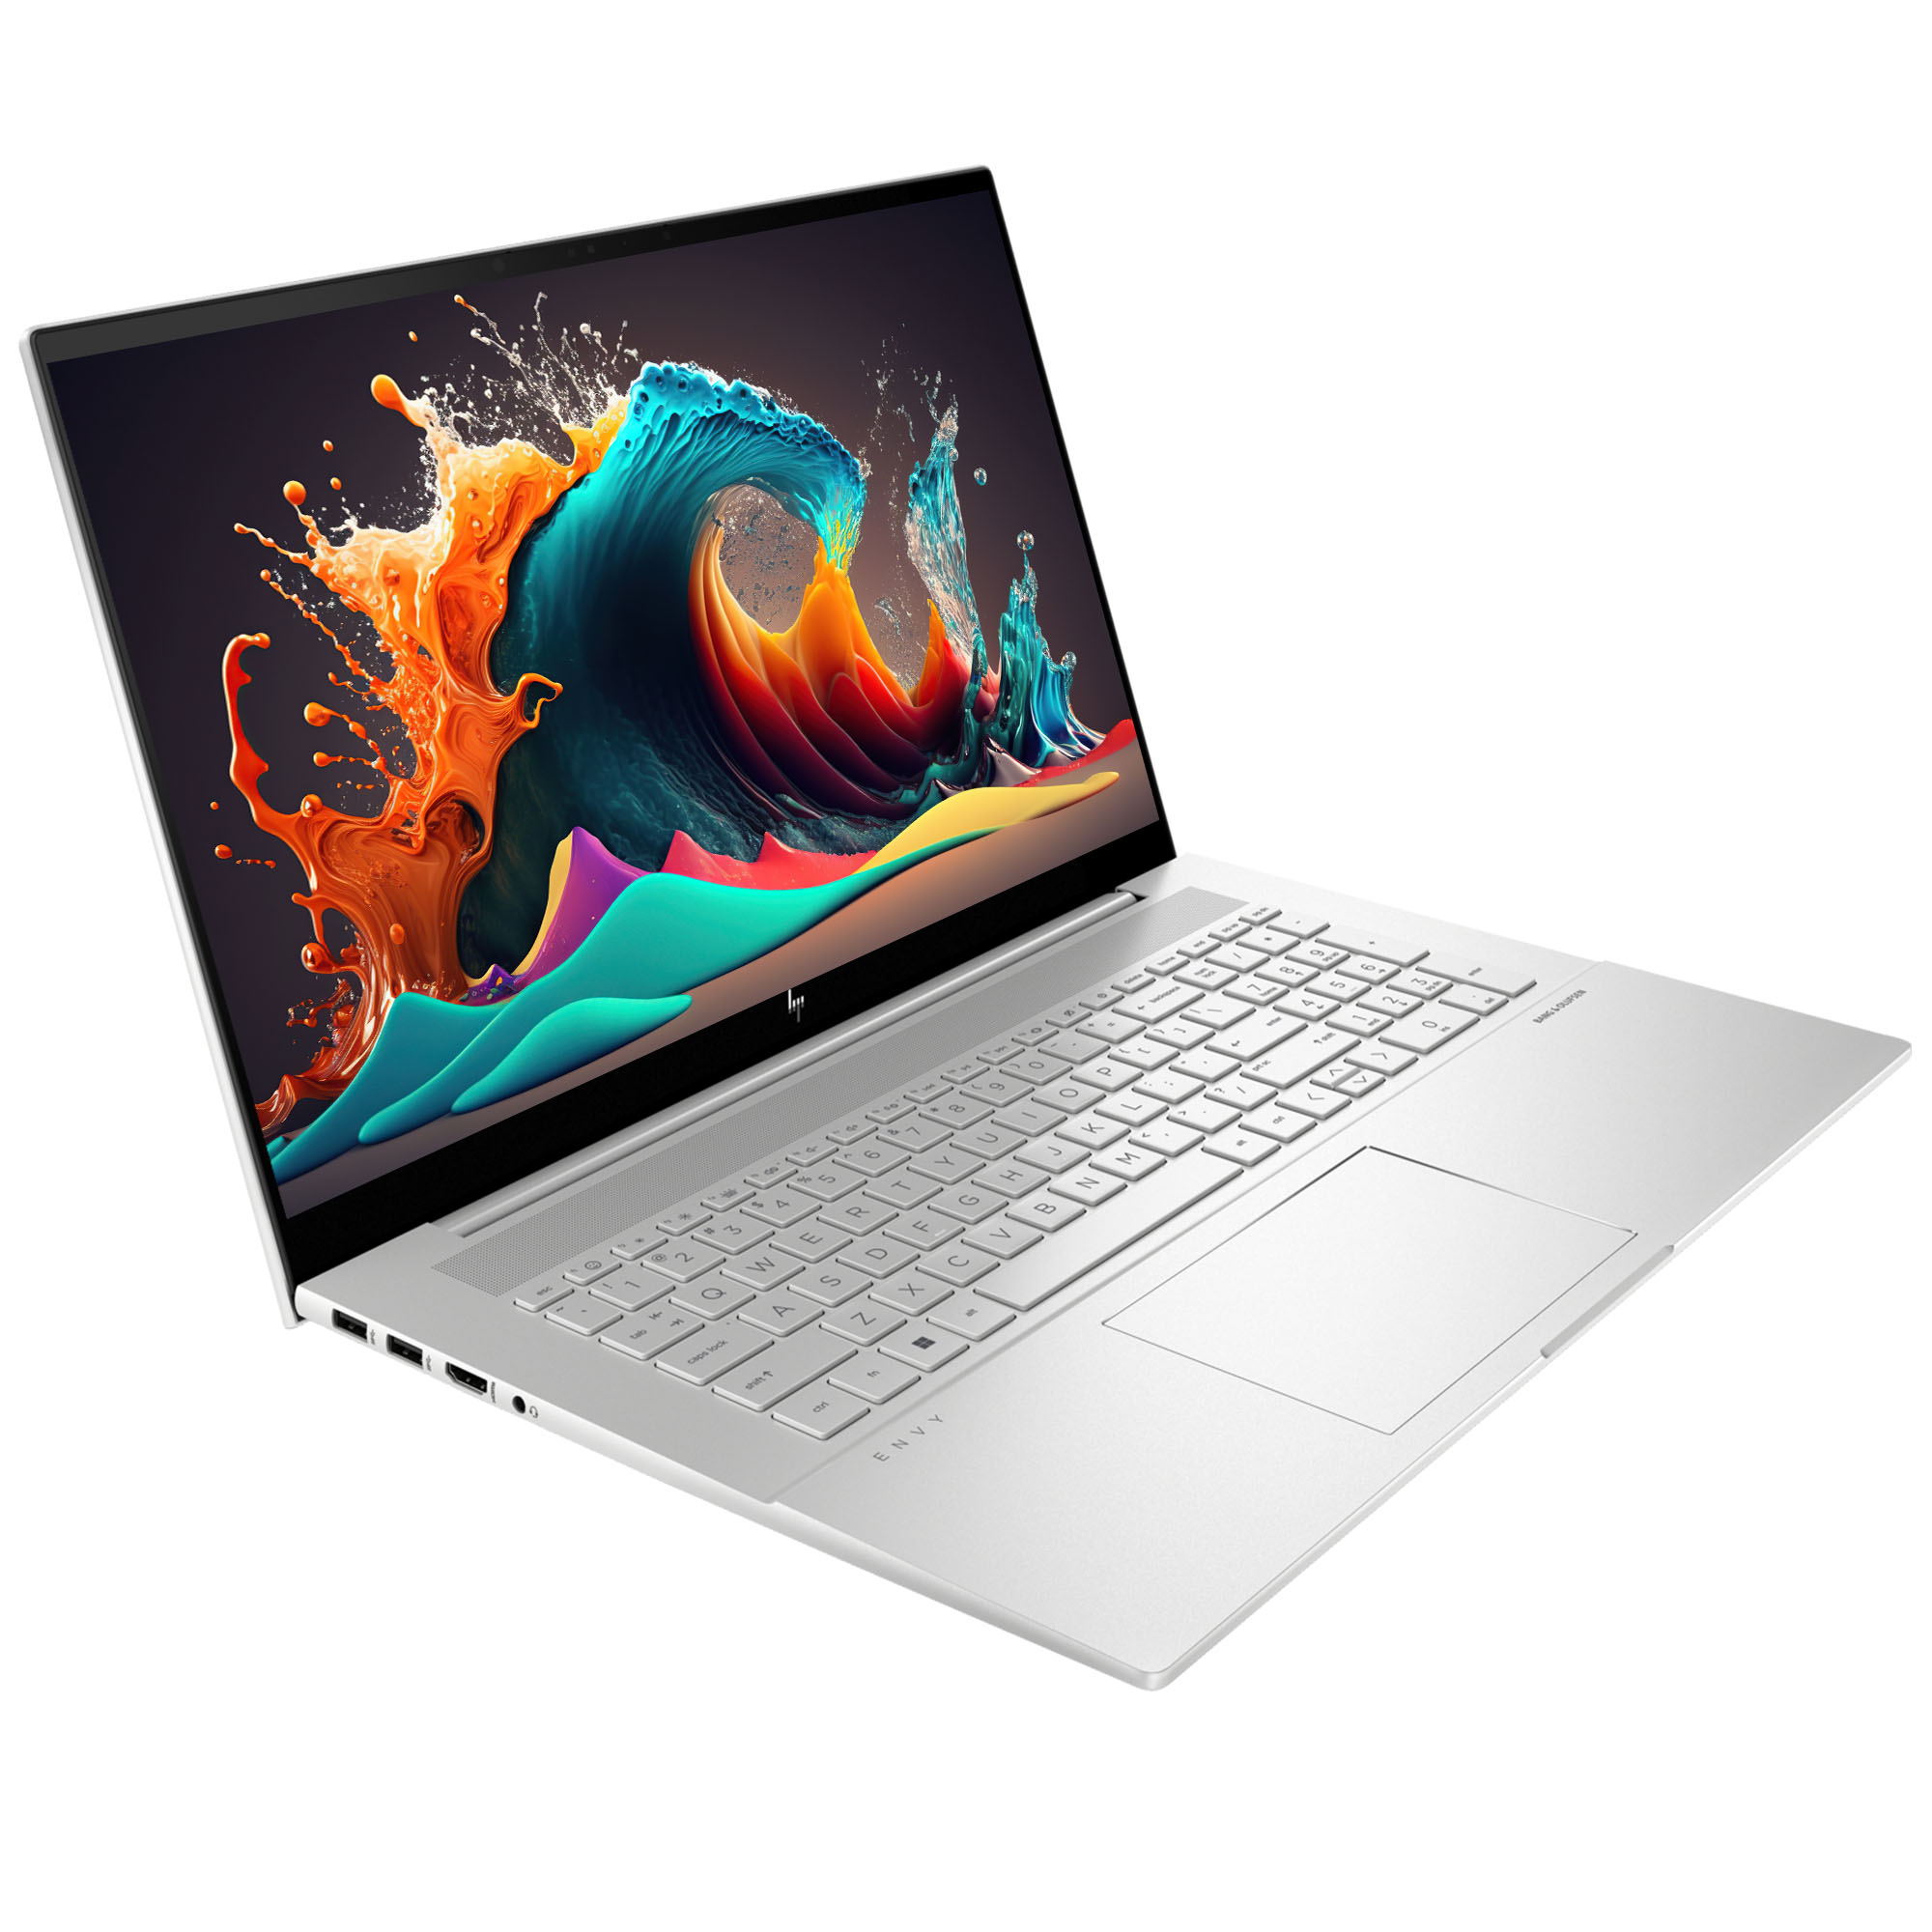 HP Envy 17 17.3" FHD Touchscreen [Windows 11 Pro] Business Laptop, Intel 12-Core i7-1260P, 32GB DDRR4 RAM, 2TB PCIe SSD, Iris Xe Graphic, Backlit KB, Wi-Fi6, Bluetooth 5.3, w/Office Accessories - image 2 of 6